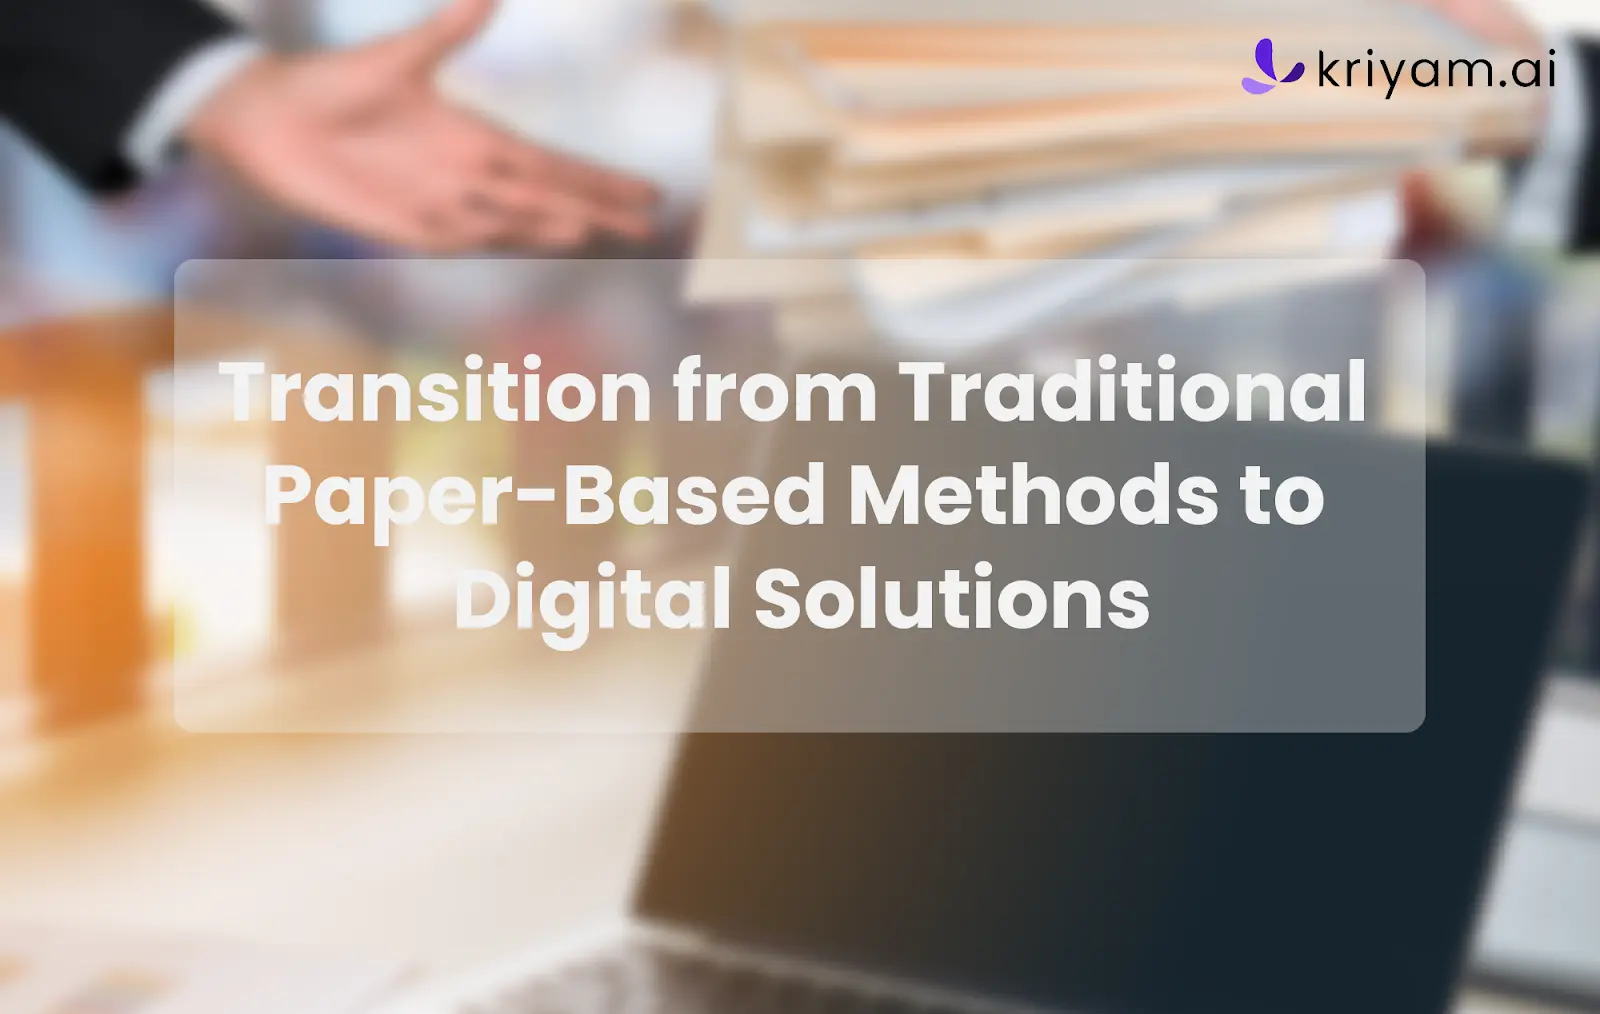 Transition from Traditional Paper-Based Methods to Digital Solutions